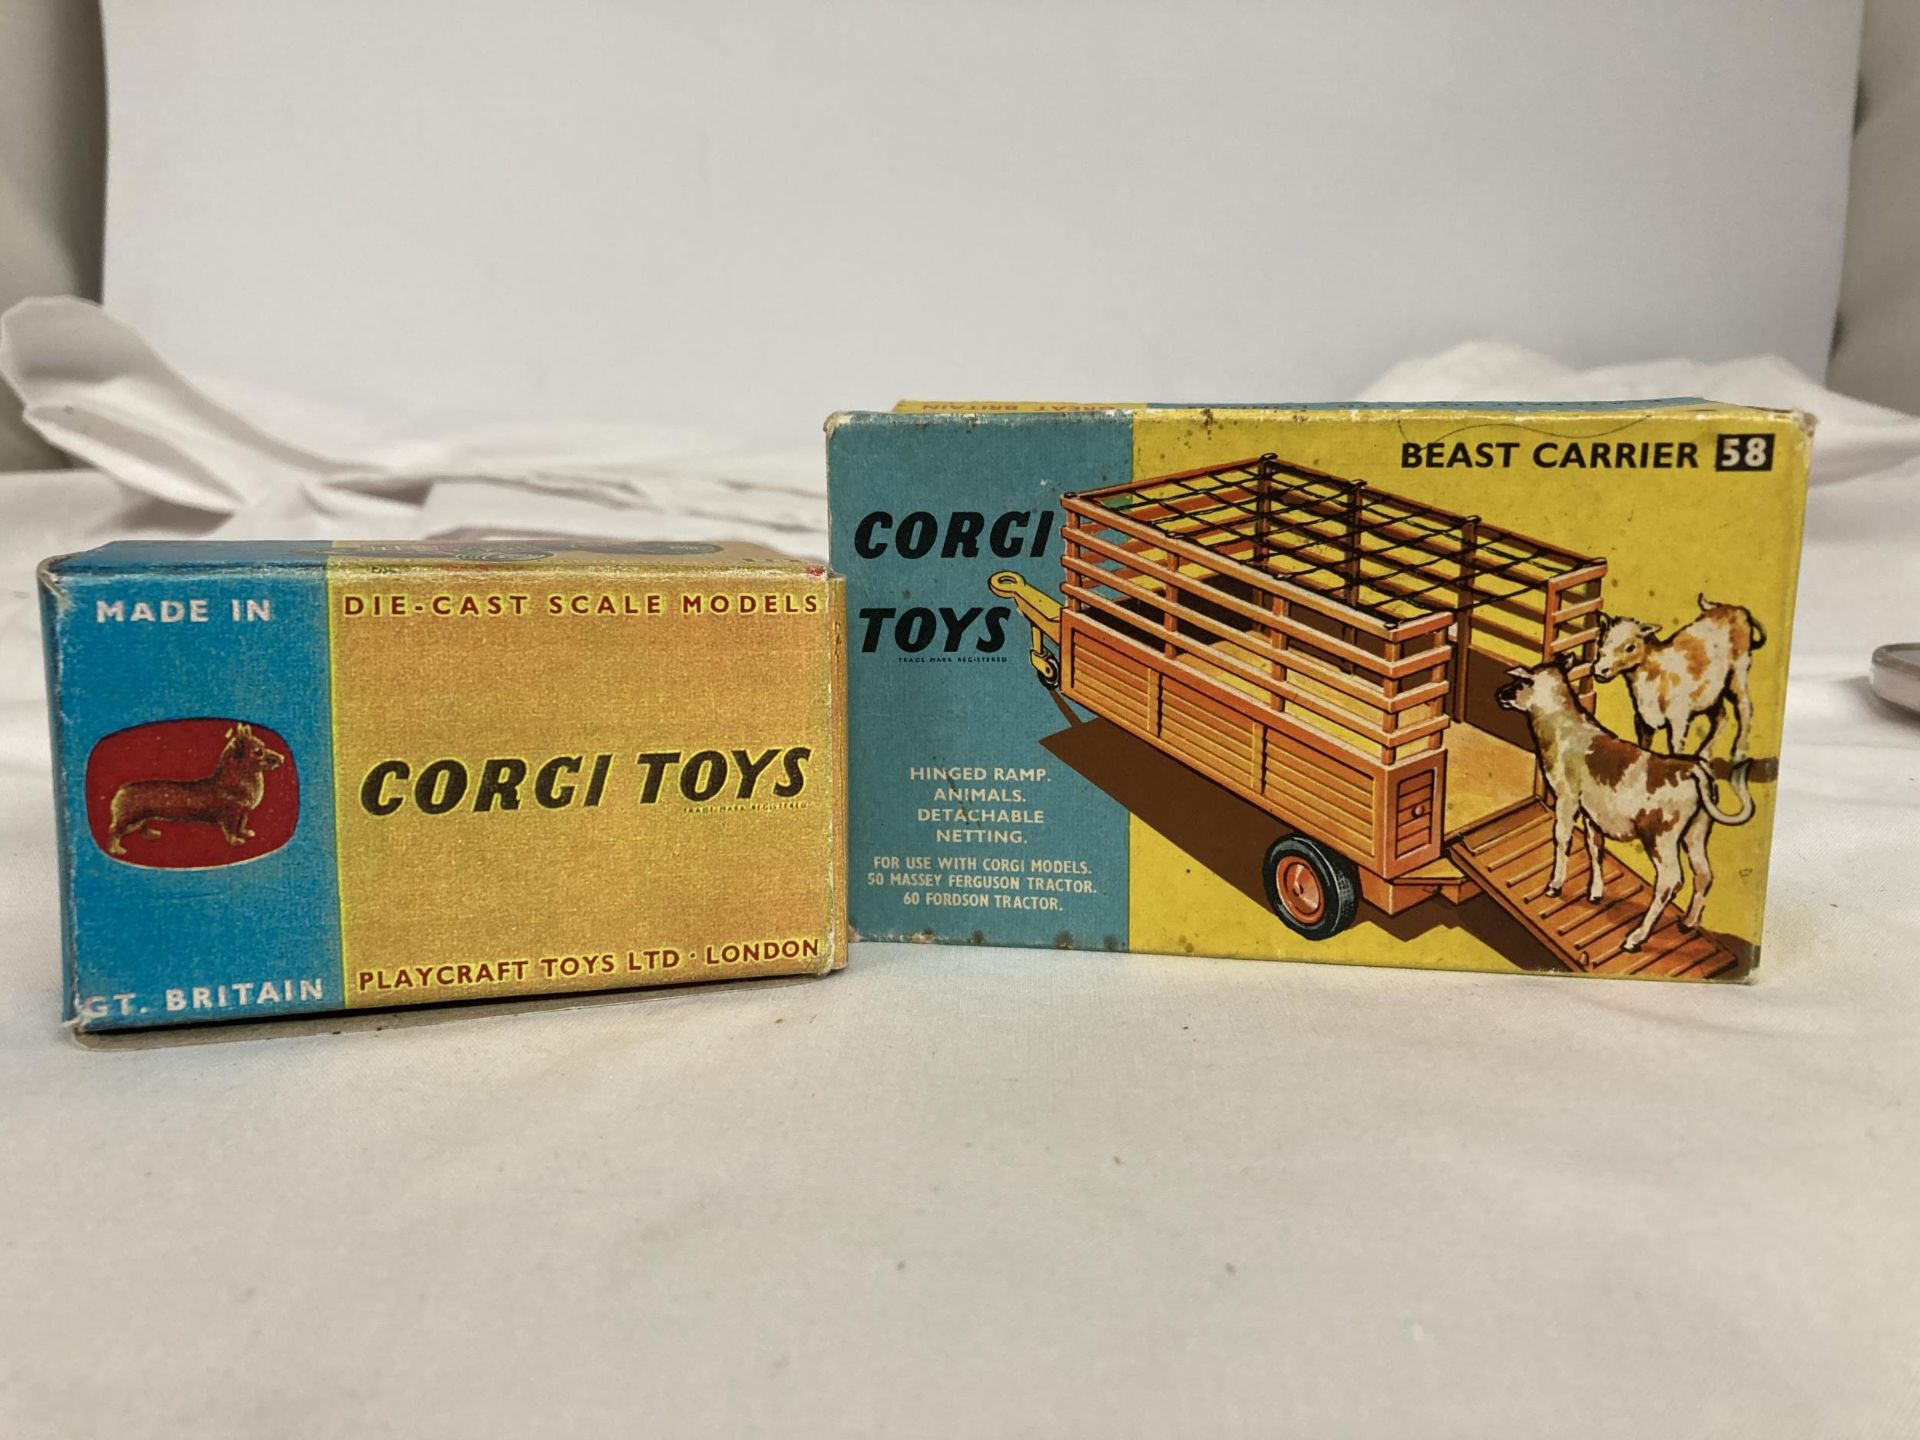 TWO BOXED CORGI MODELS NO. 58 - BEAST CARRIER WITH ANIMALS AND NO. 50 - A MASSEY FERGUSON 65 TRACTOR